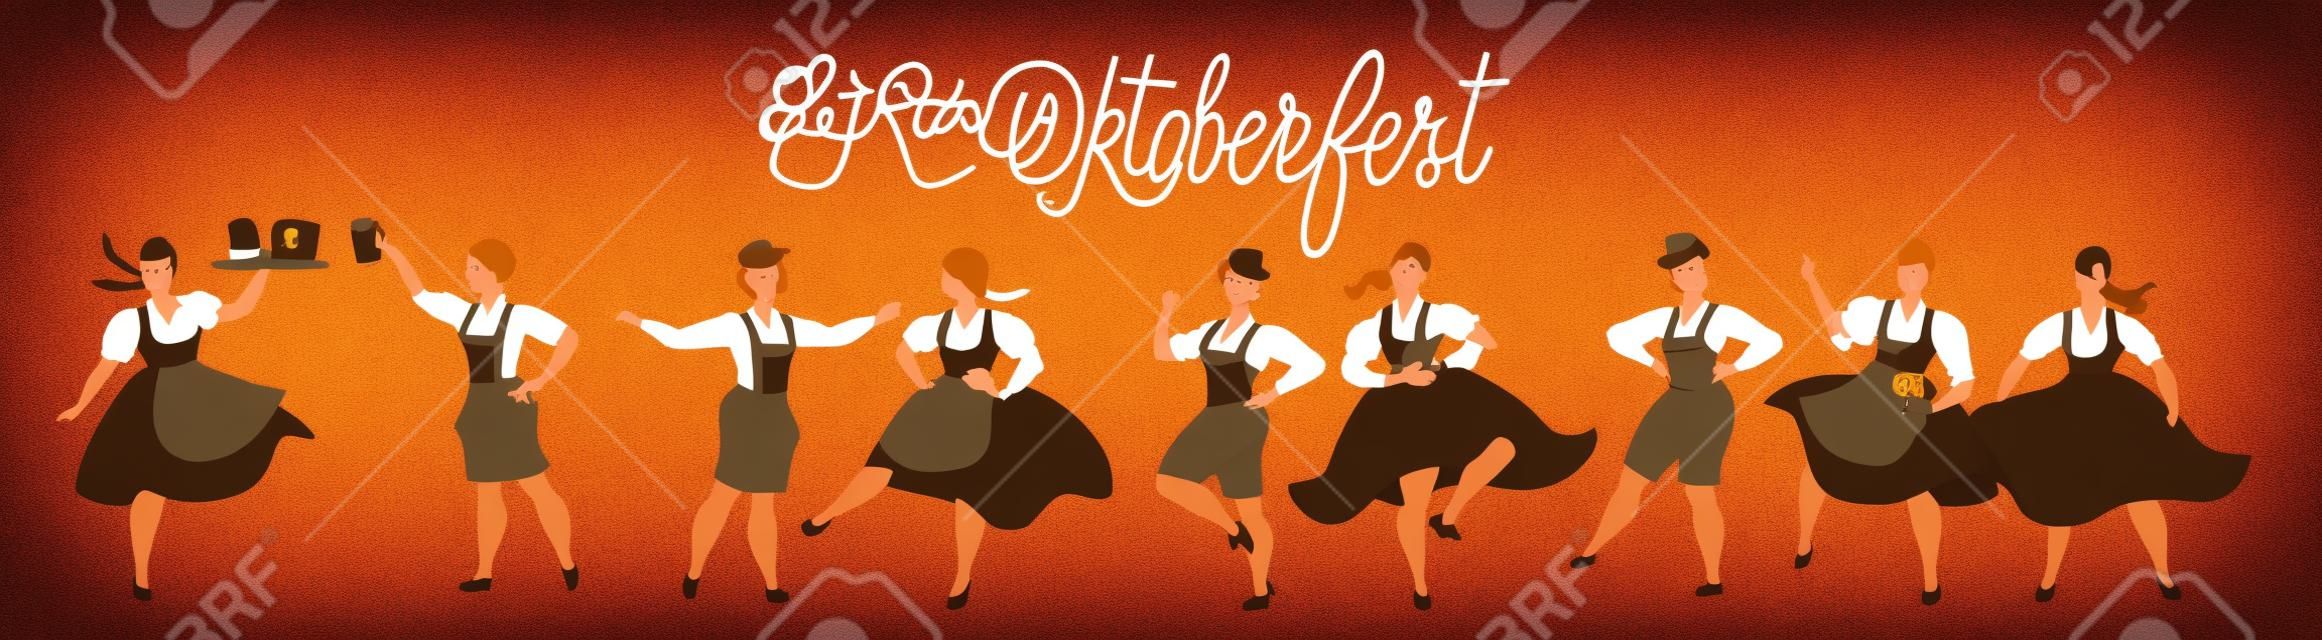 Oktoberfest beer festival. People drinking beer, dancing, celebrating. German Traditional holiday. Set of people characters. Octoberfest concept. National German men and women costumes. Modern vector.